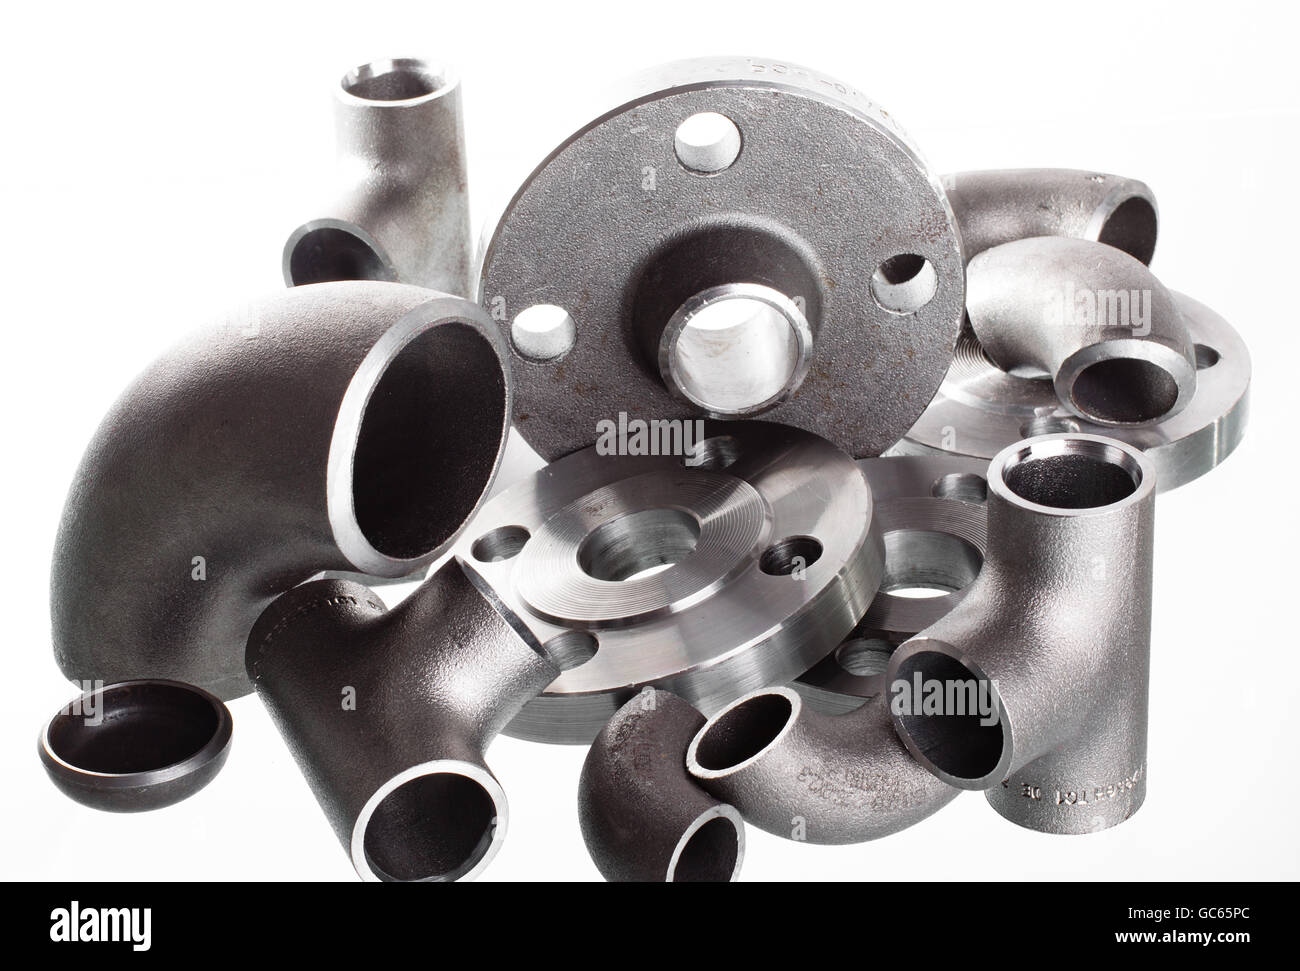 Steel welding fittings on group. Flanges, elbow, tees and plu on white space. Stock Photo